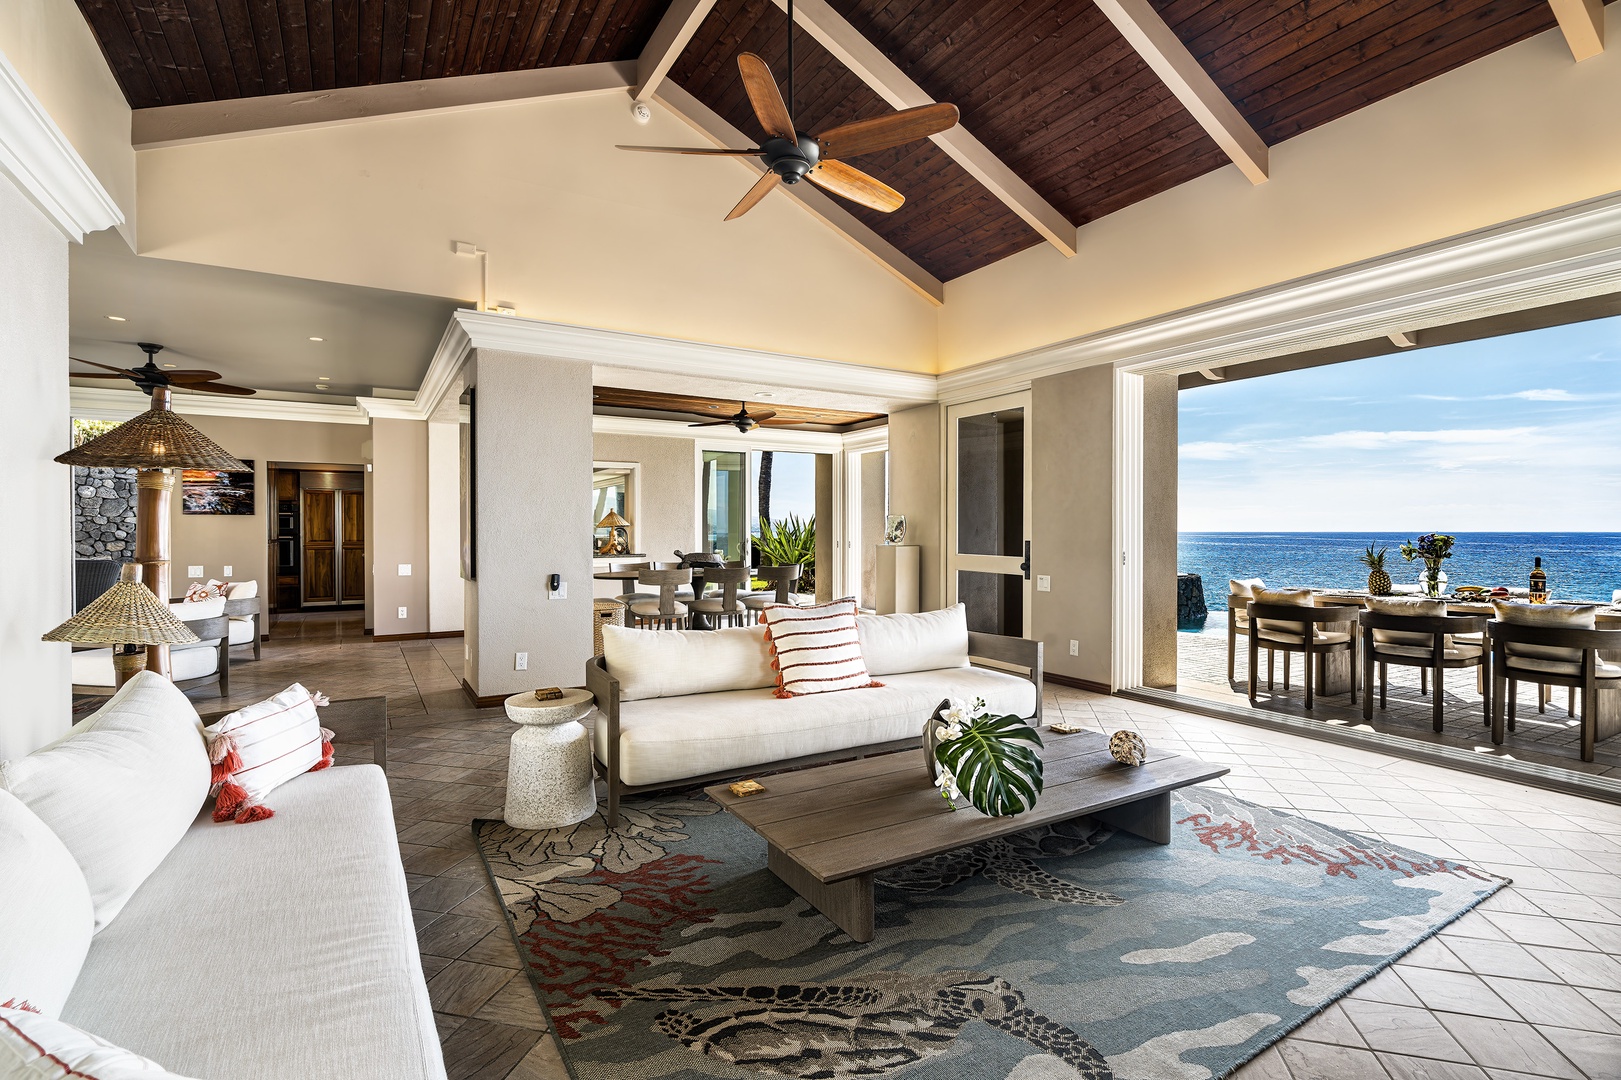 Kailua Kona Vacation Rentals, Ali'i Point #9 - Vaulted ceilings with large sliding doors make this room spectacular